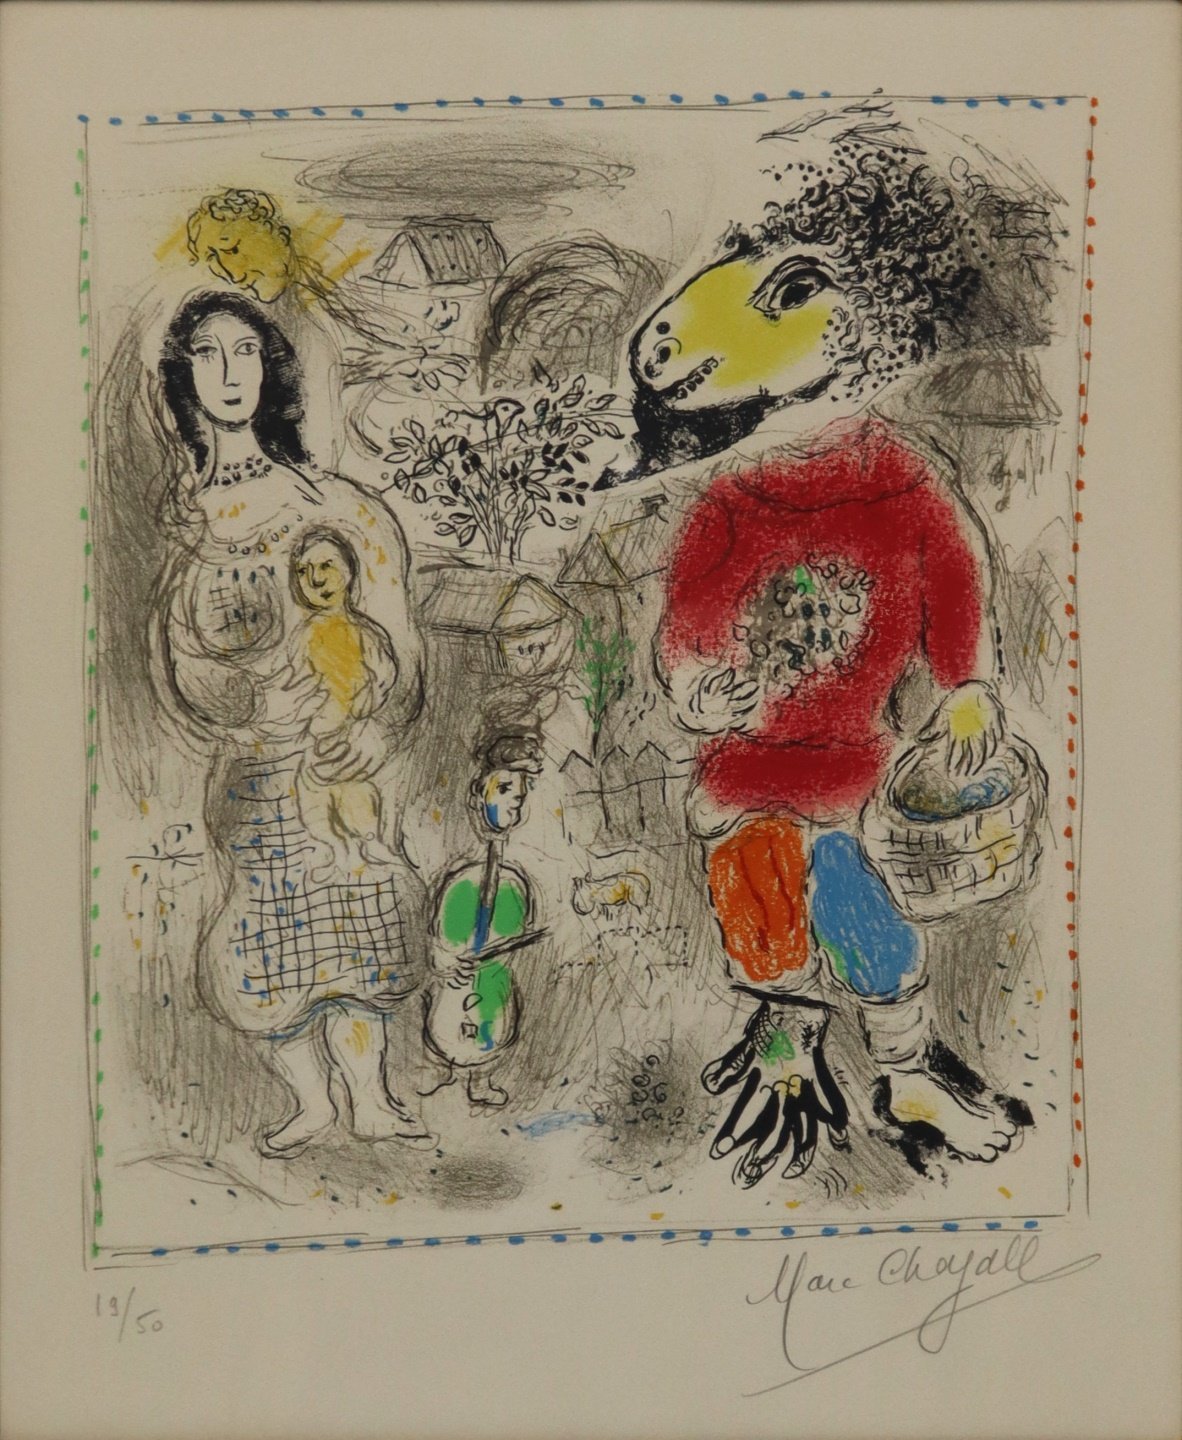 MARC CHAGALL (RUSSIAN/FRENCH, 1887-1985).